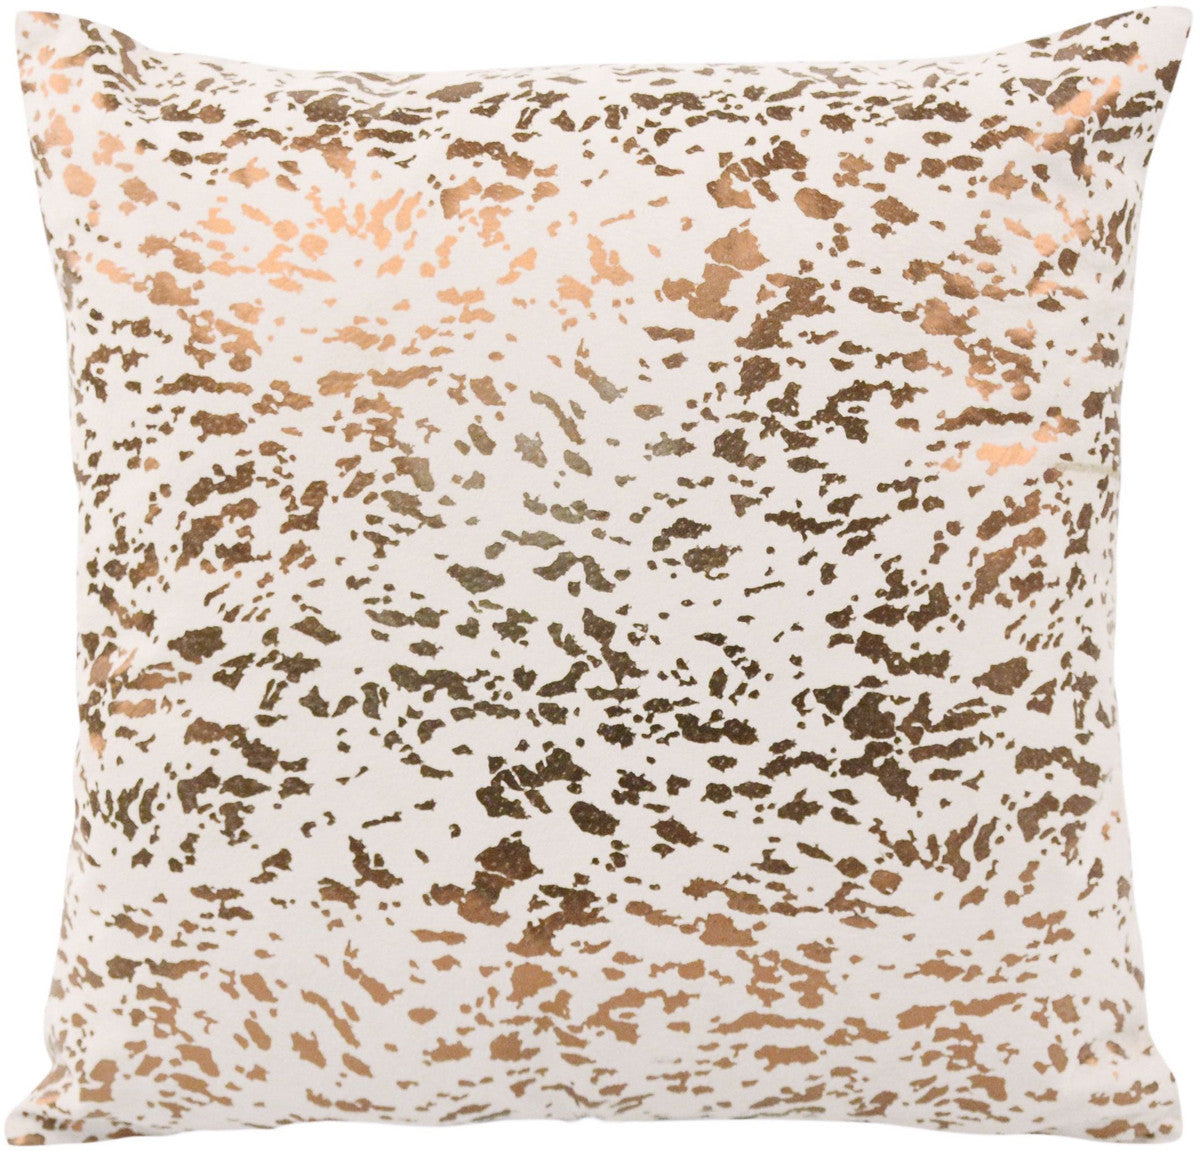 Leather Speckled Gold Pillow